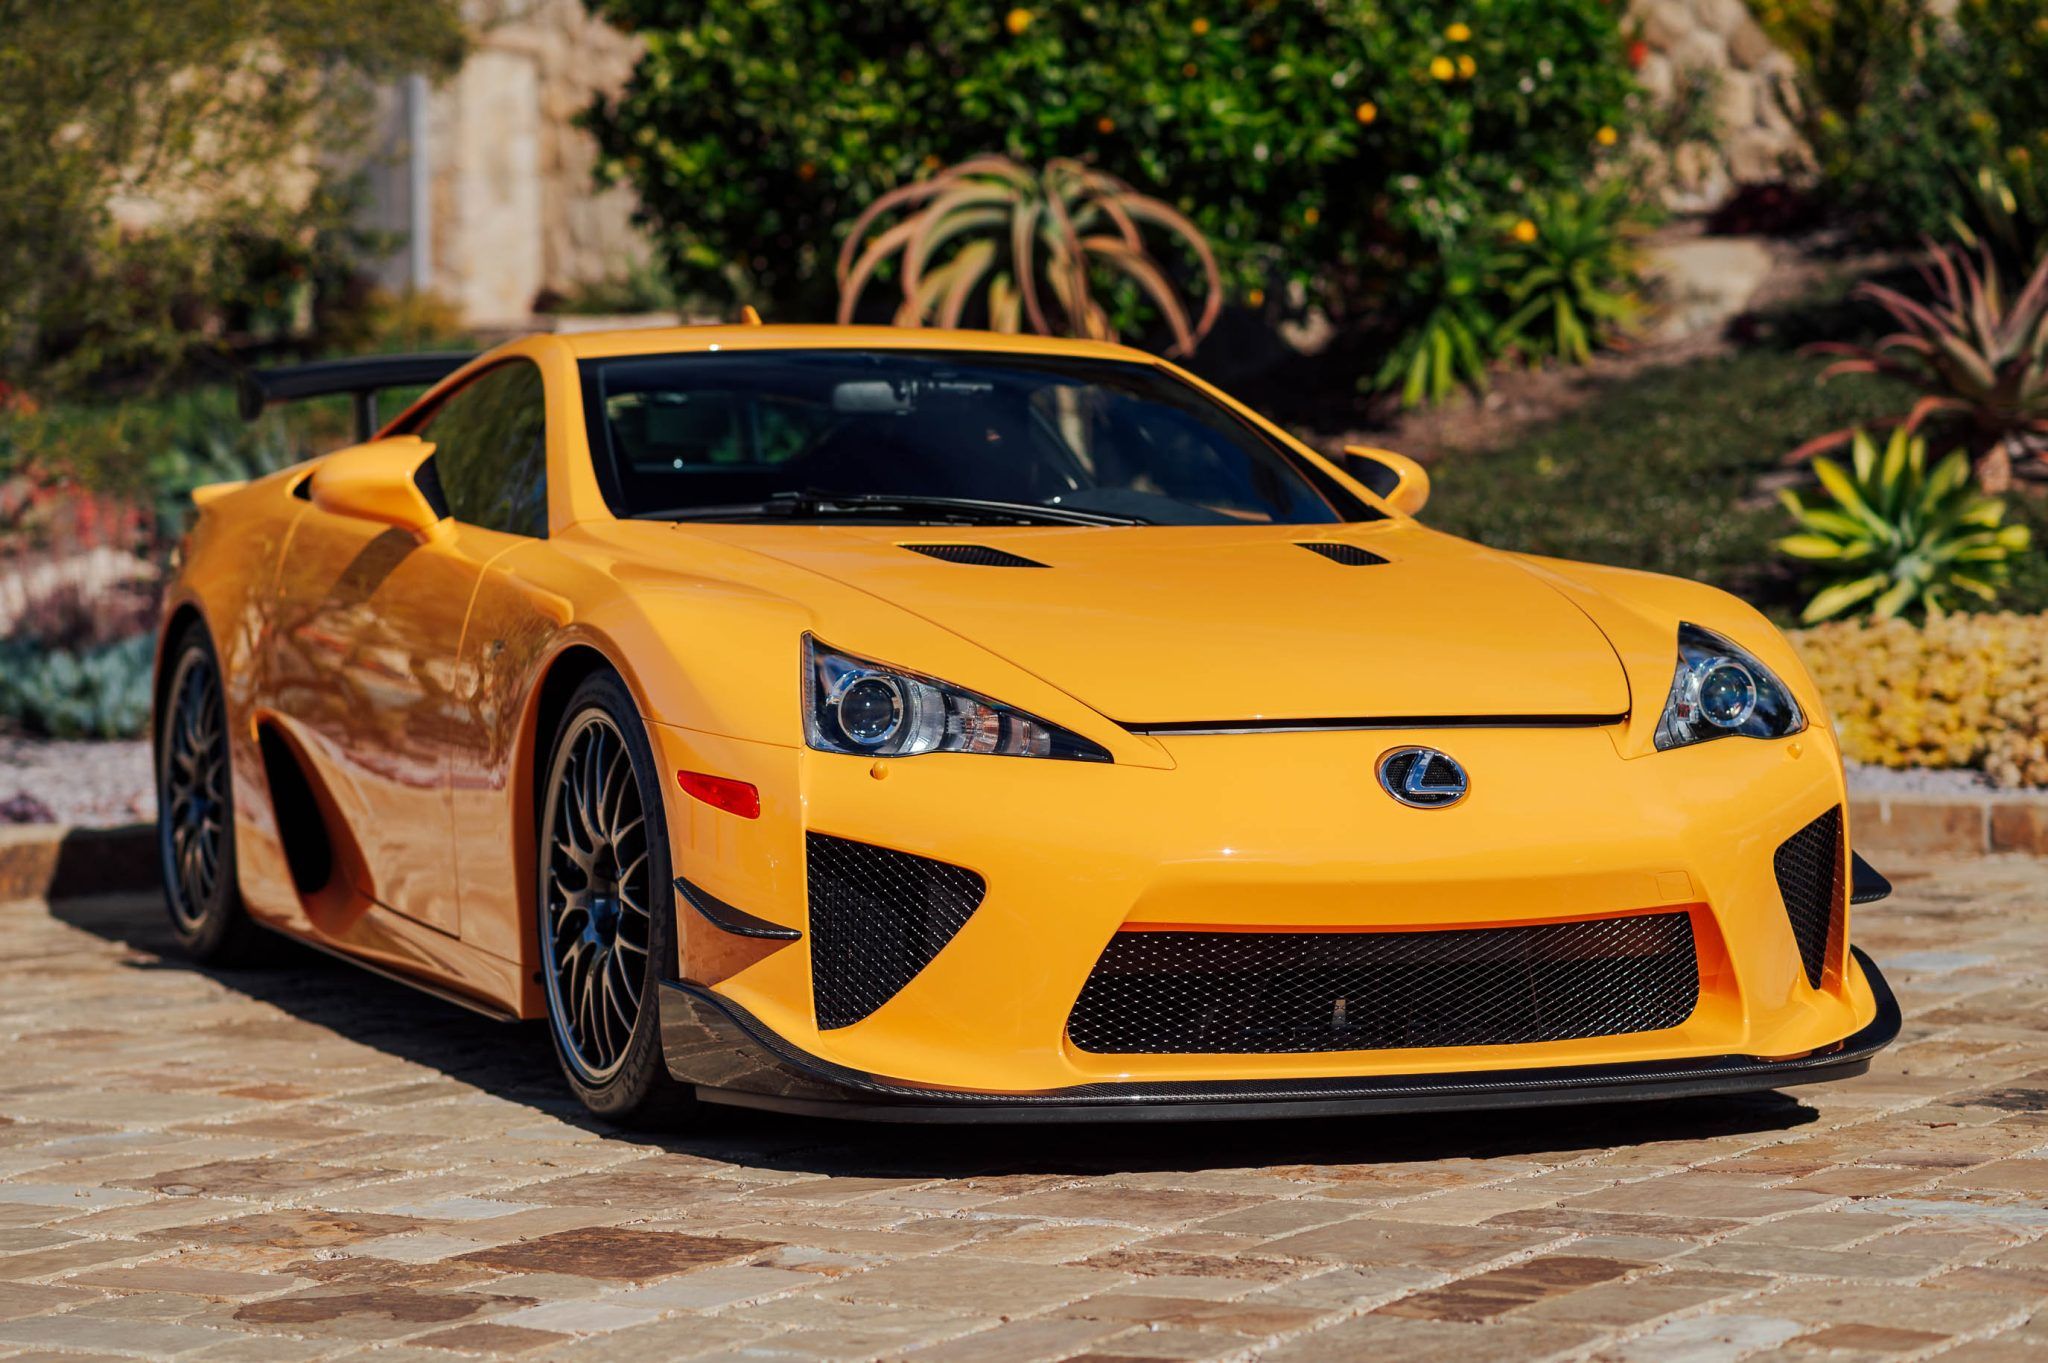 2K-Mile Lexus LFA Is Our Bring a Trailer Pick of the Day